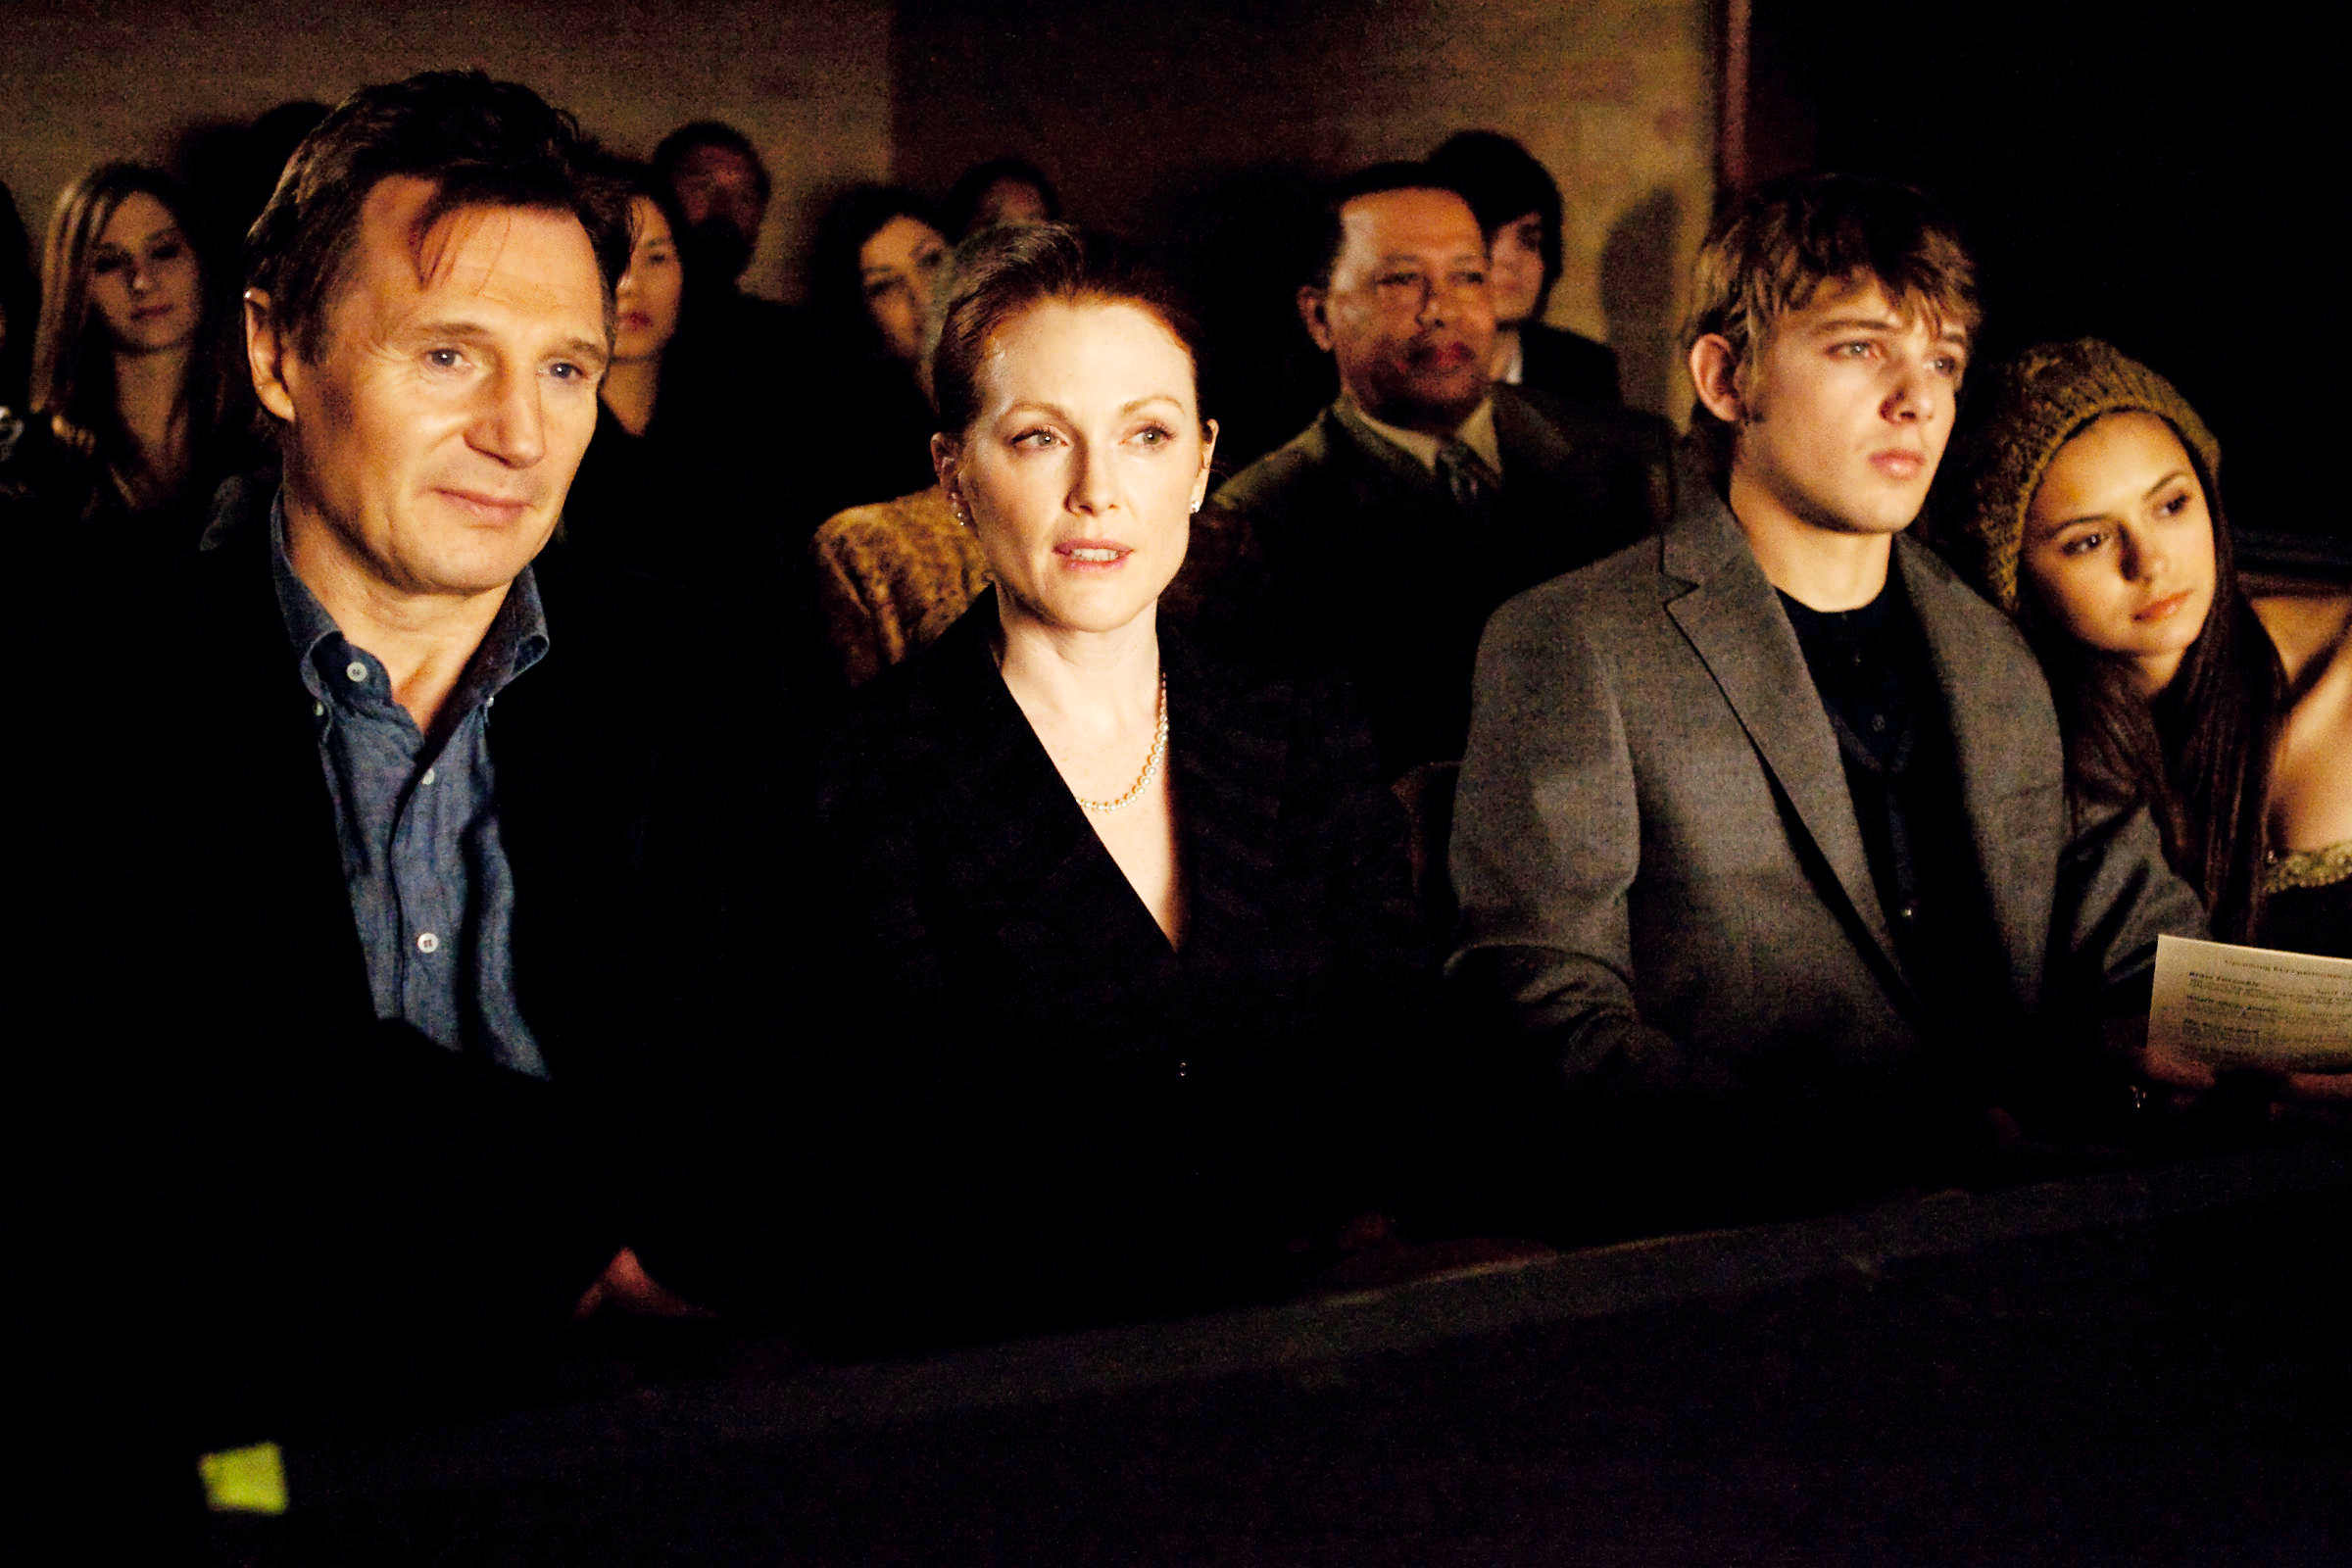 Liam Neeson, Julianne Moore, Max Thieriot and Nina Dobrev in Sony Pictures Classics' Chloe (2010)